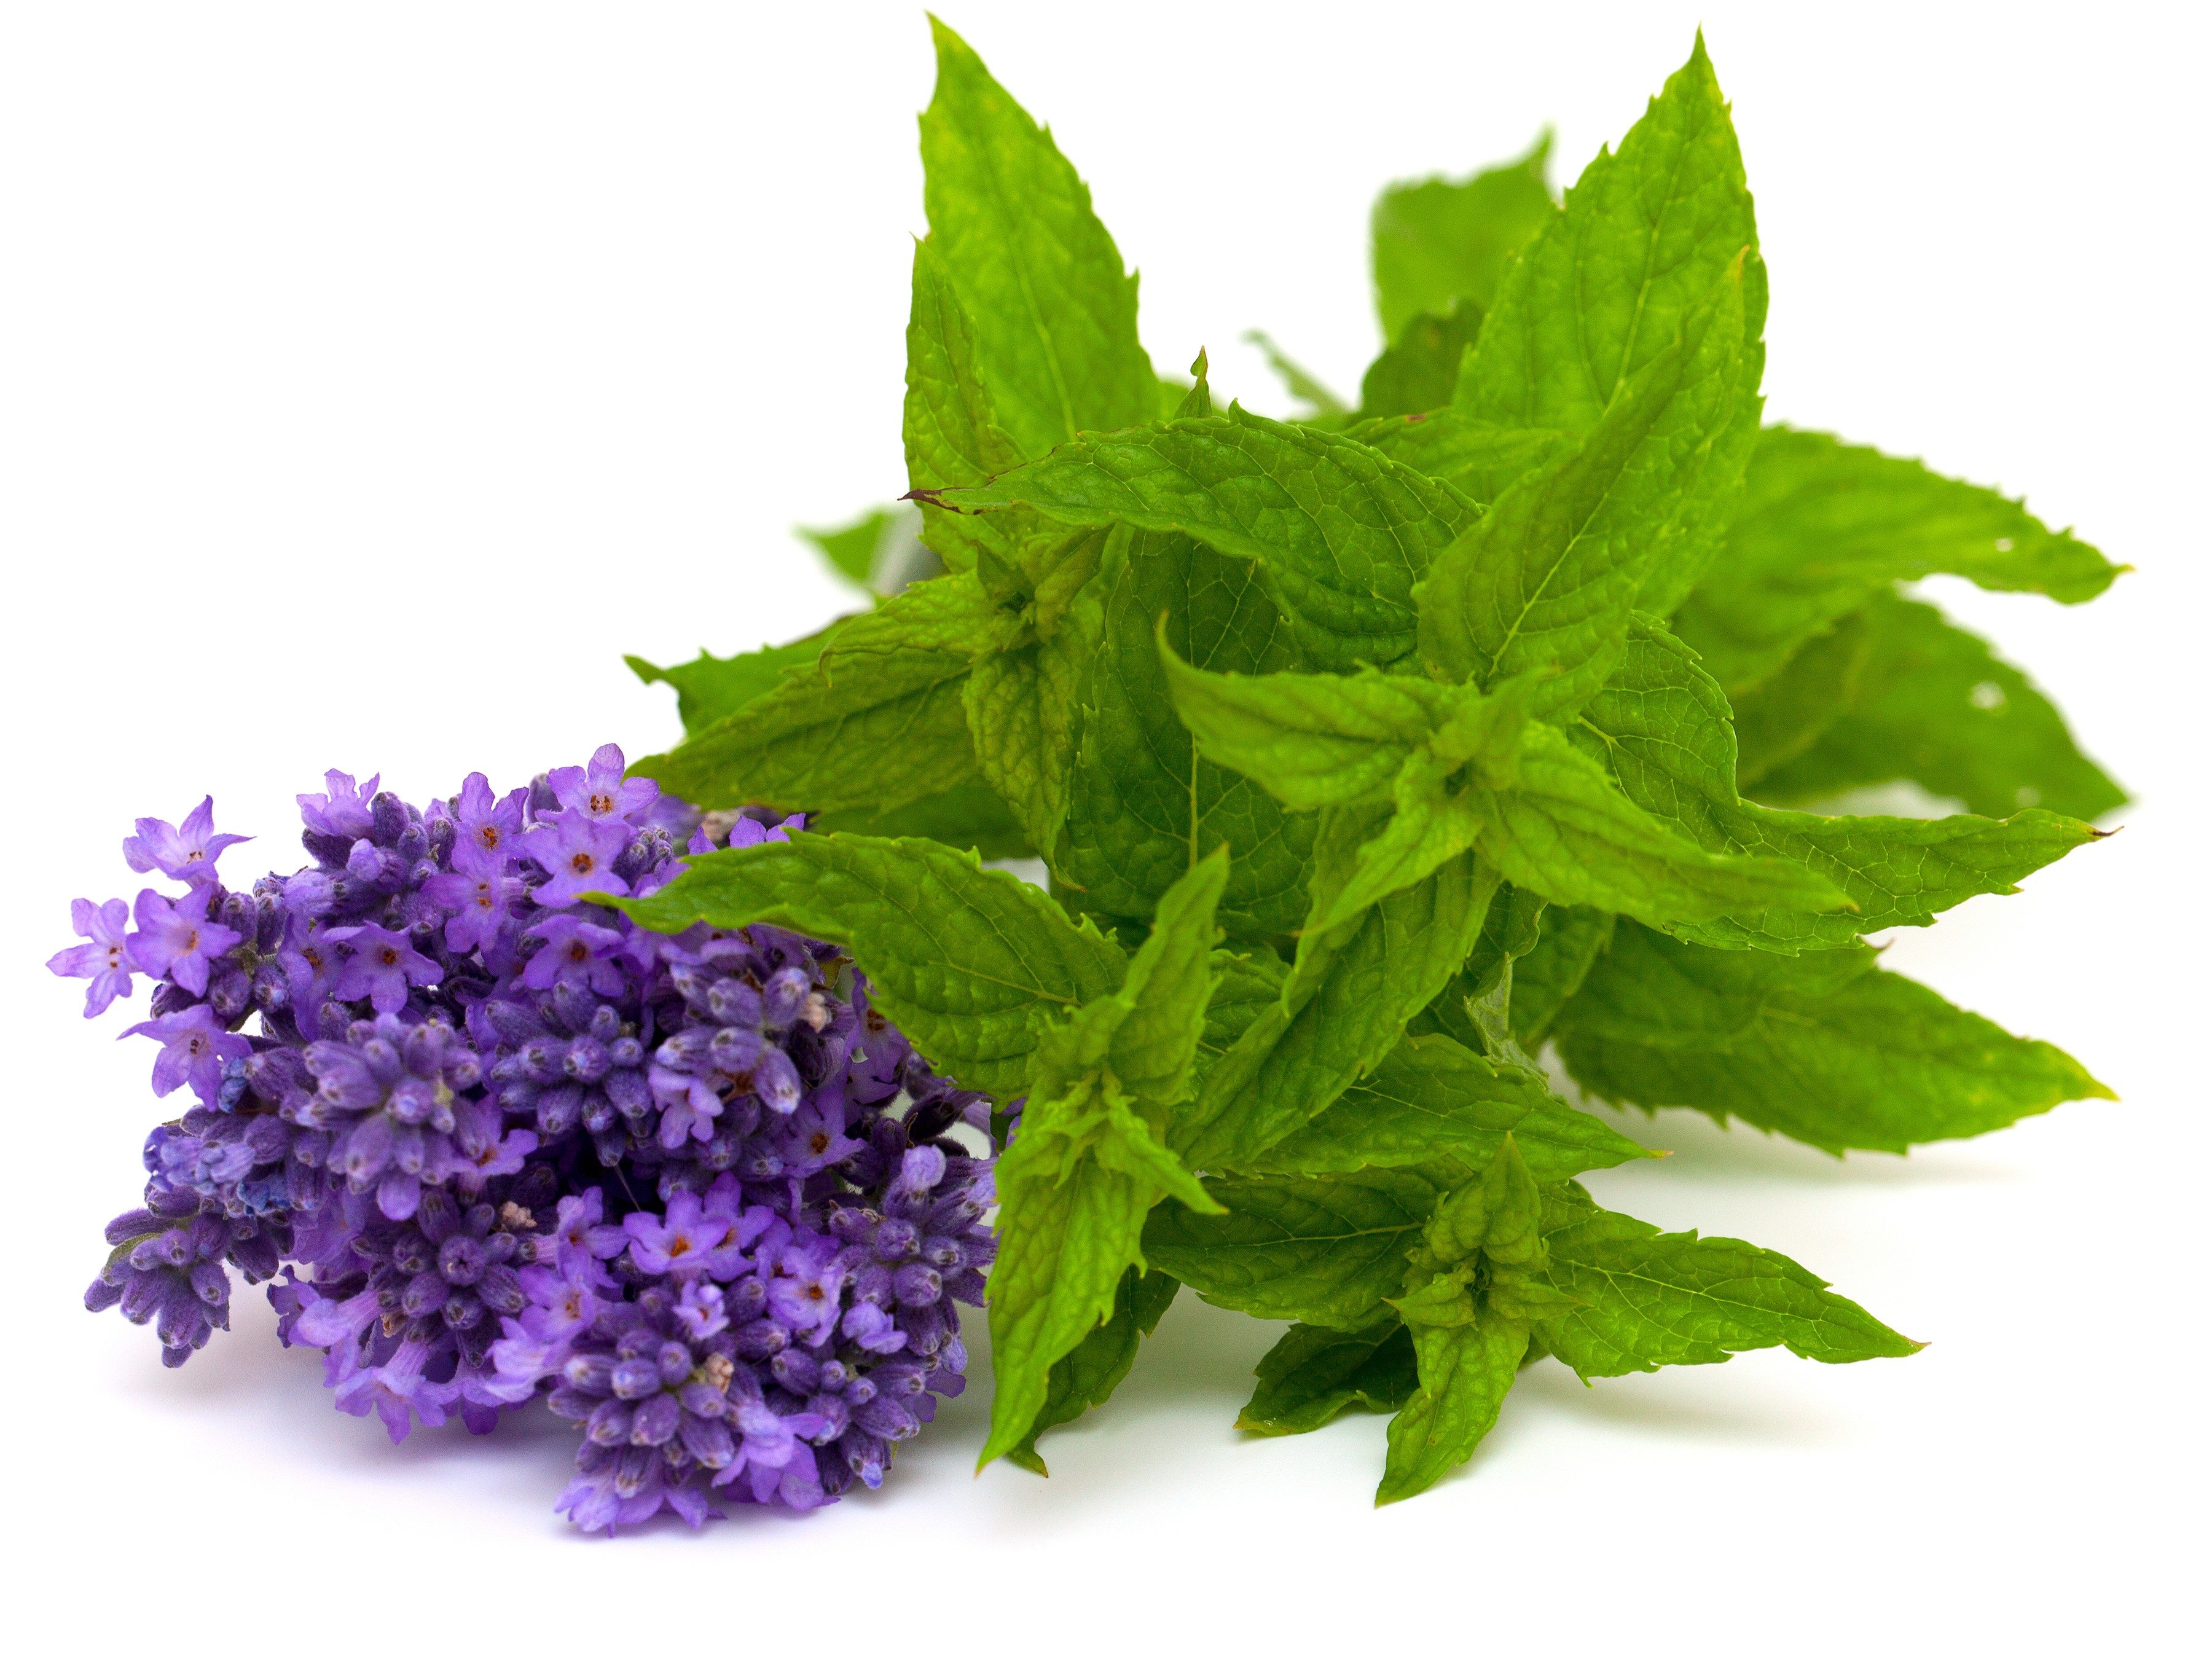 3. Peppermint and lavender essential oils